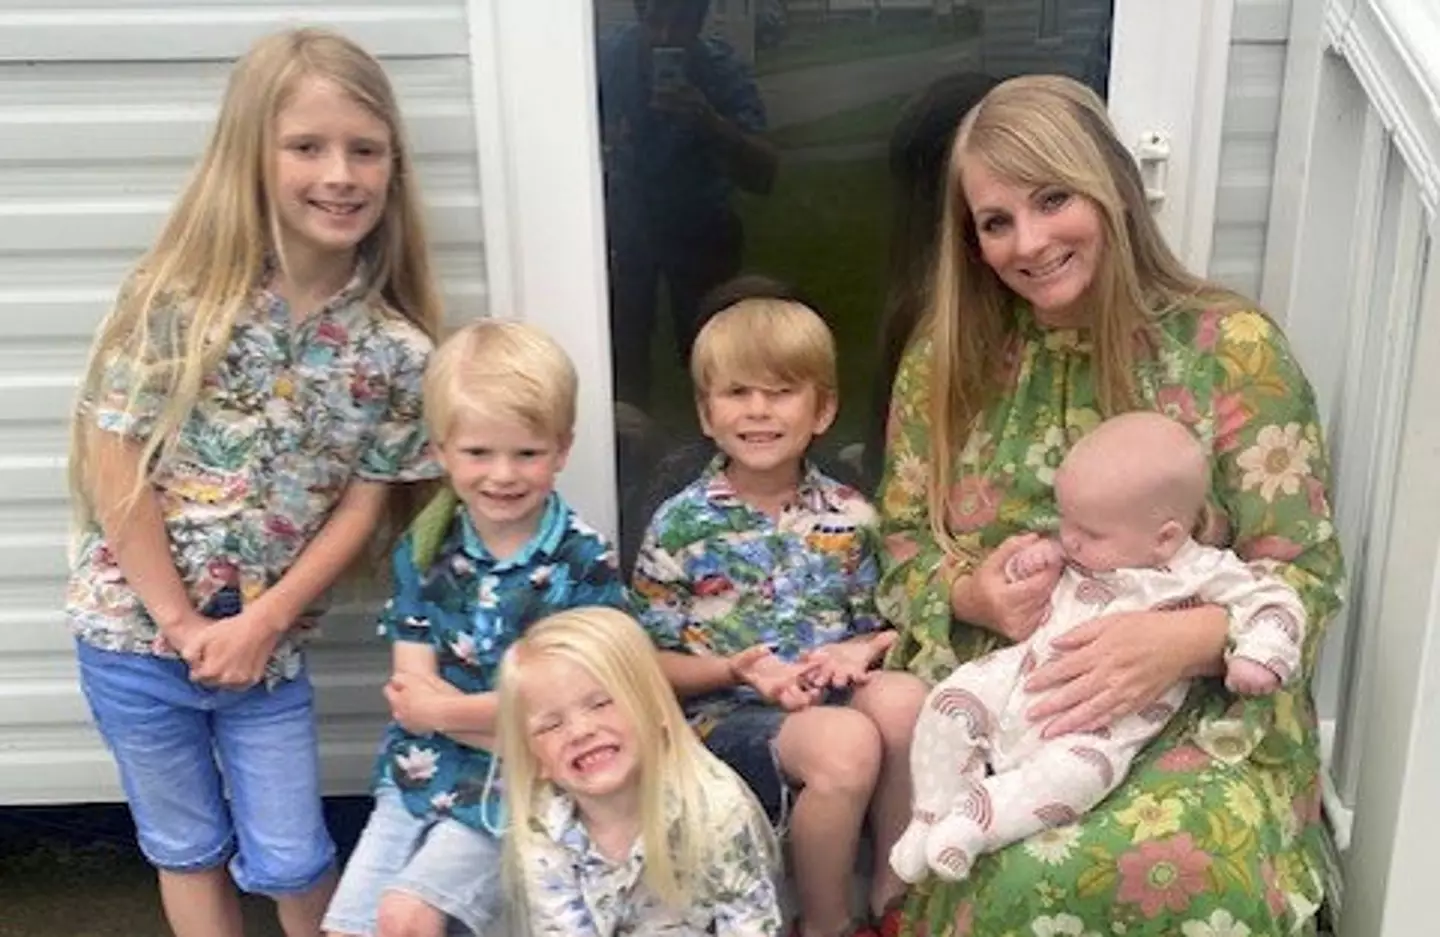 One mum has revealed how she decided to name her five boys after film and television characters.